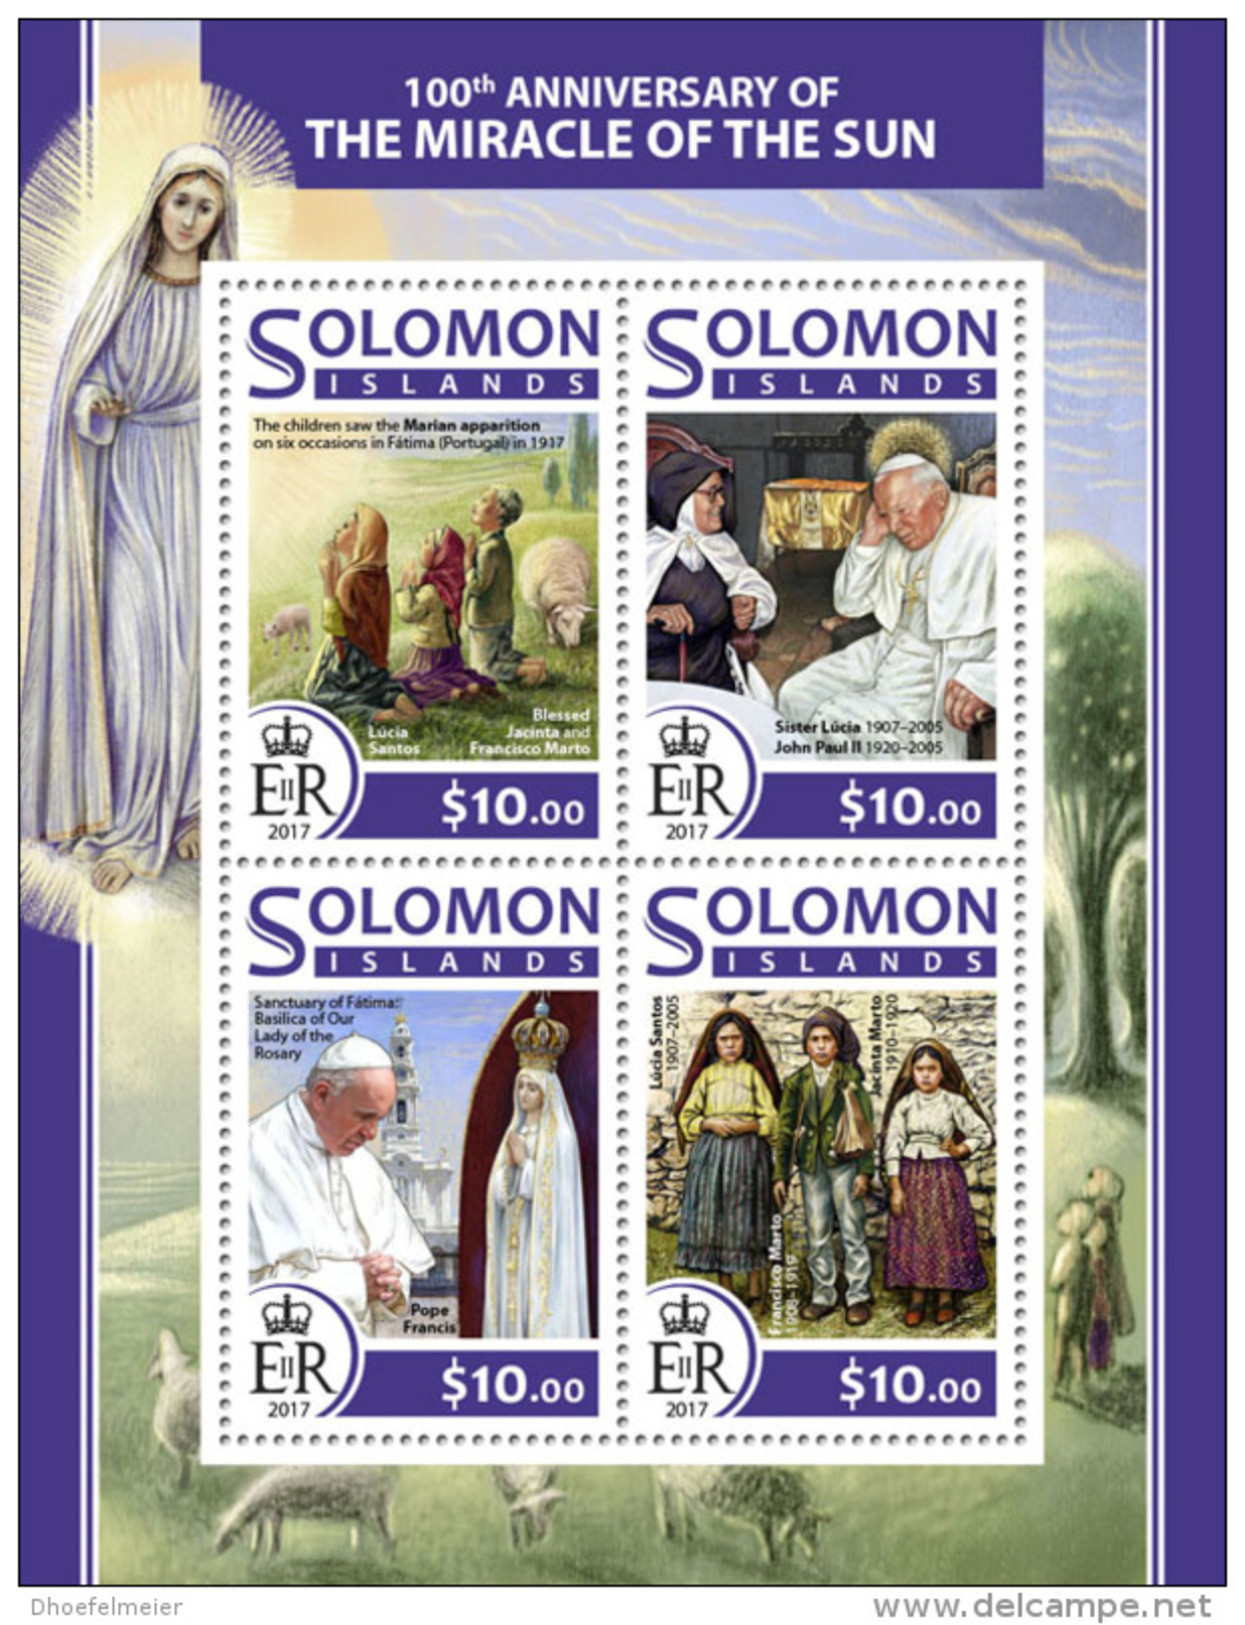 SOLOMON ISLANDS 2017 ** Miracle Of The Sun Sonnenwunder Fatima Miracle Du Soleil M/S - OFFICIAL ISSUE - DH1724 - Christianity